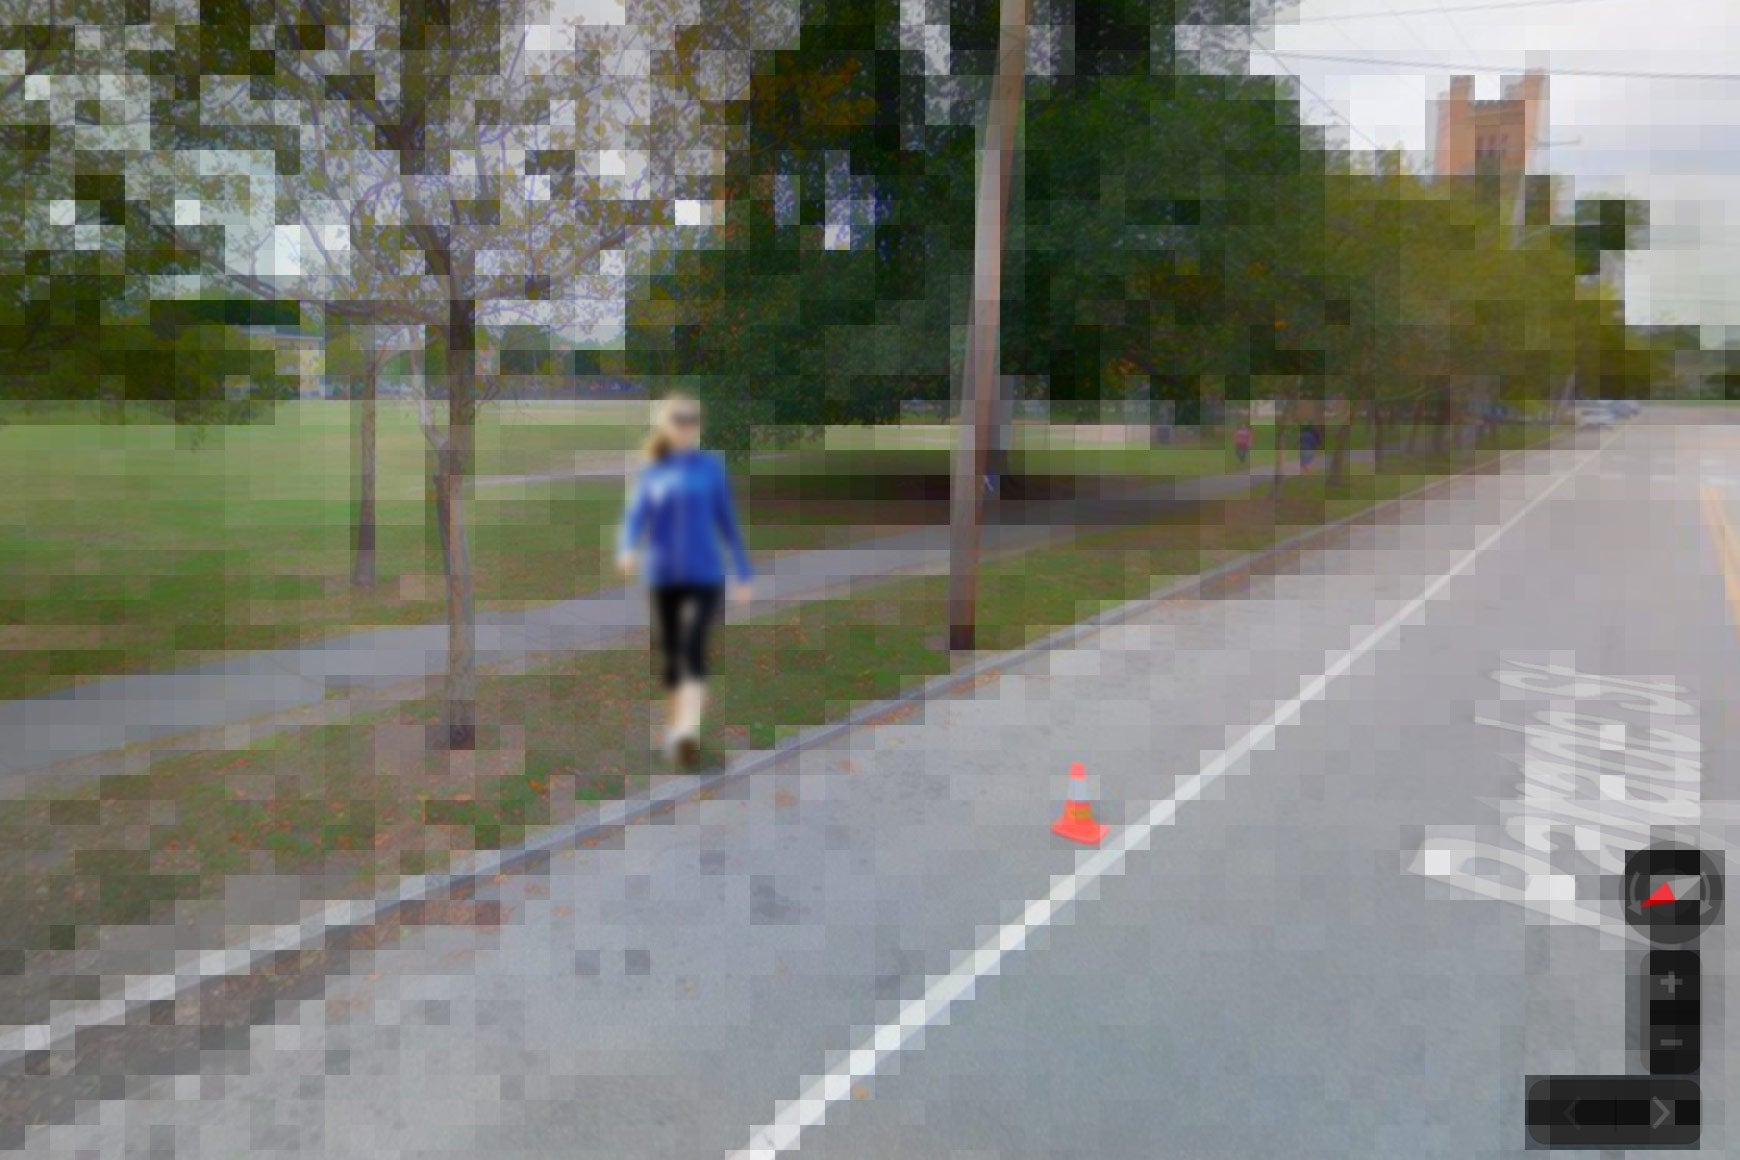 A pixelated screenshot of a Google Street View capture, of a street and sidewalk with a person walking next to some trees